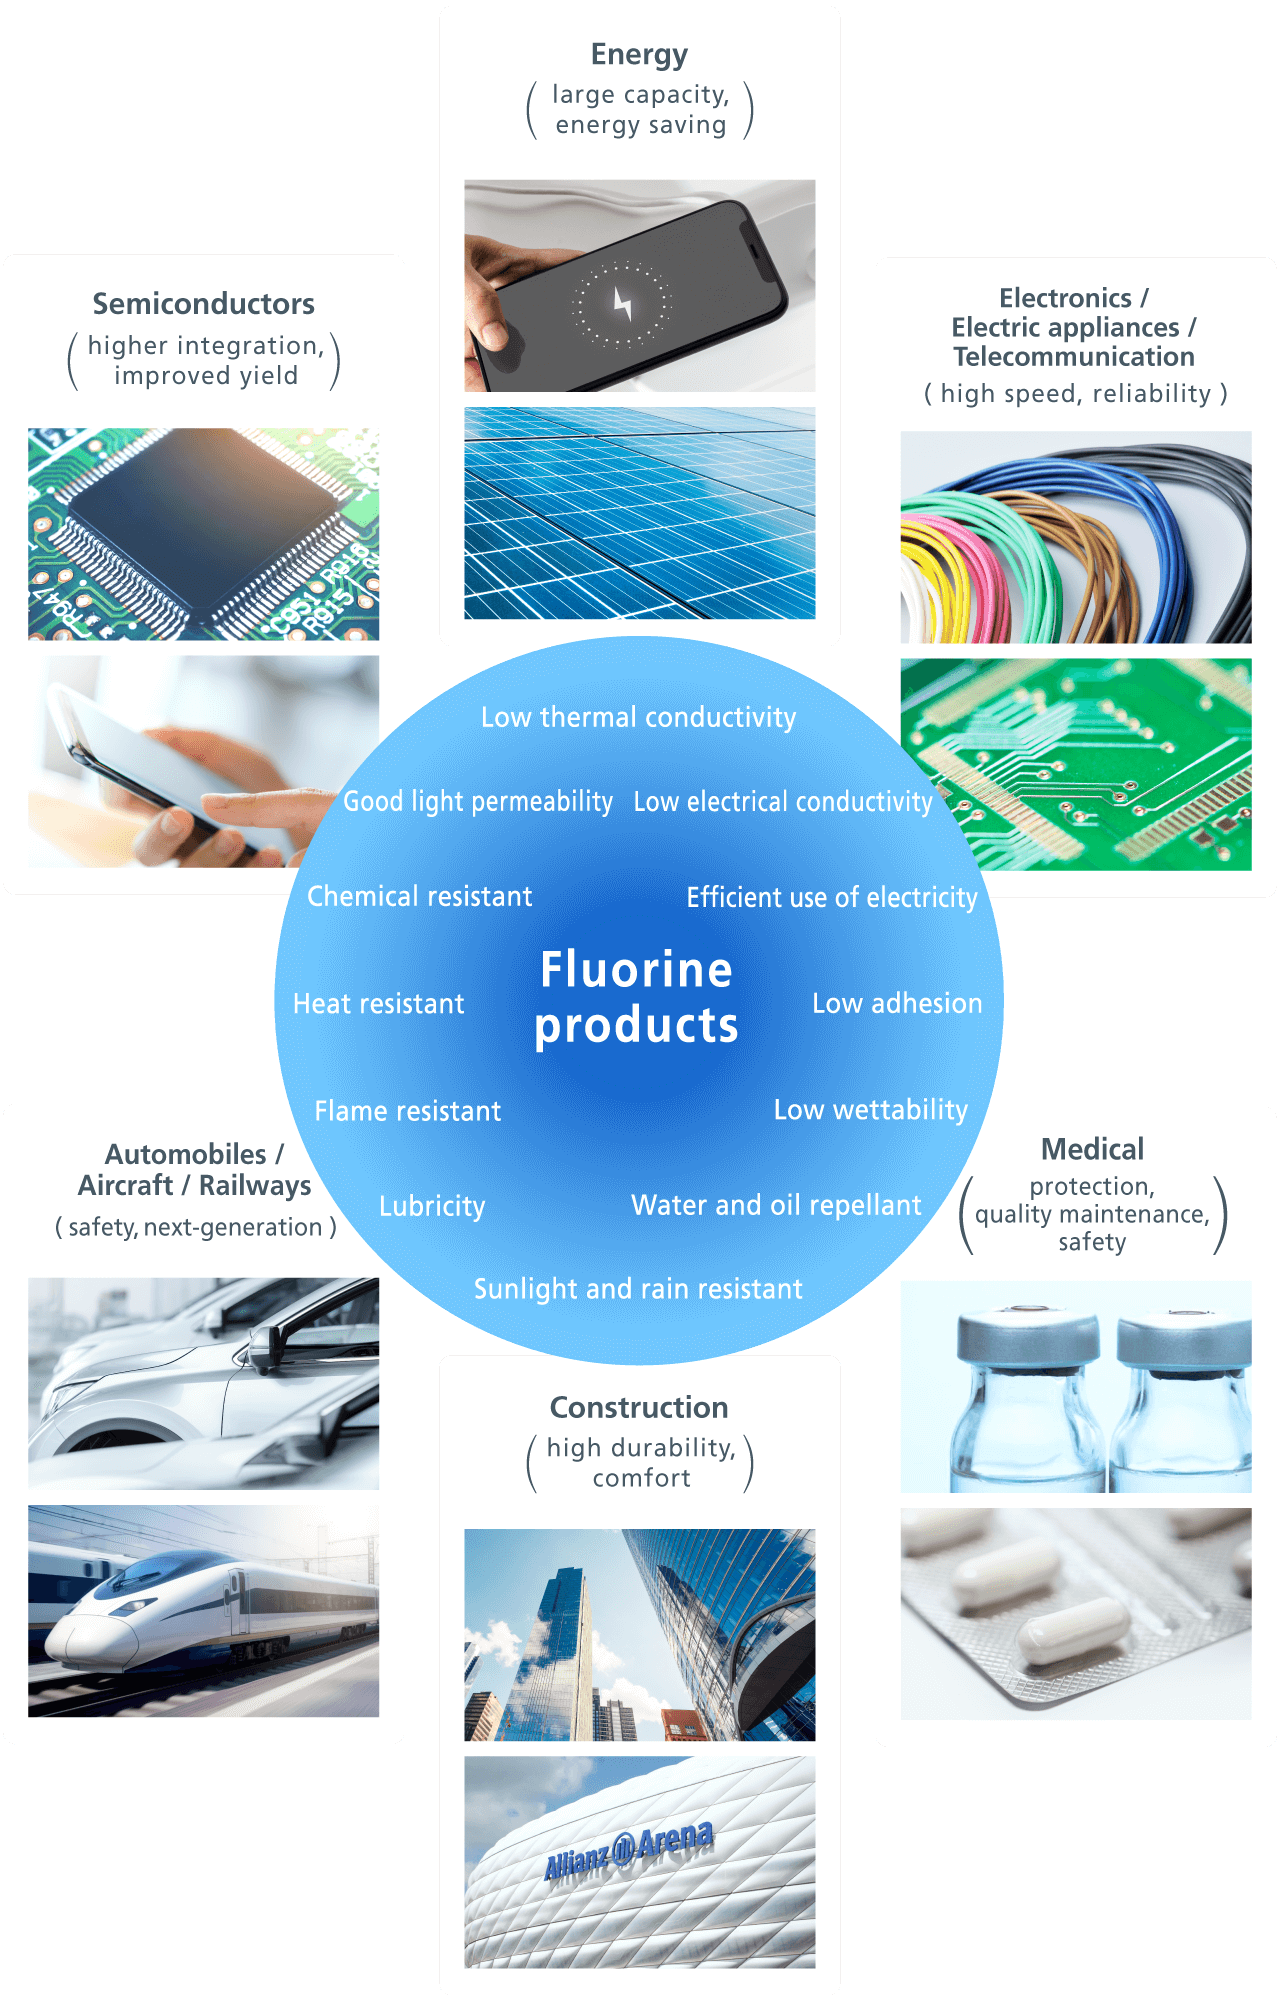 functions of fluorine products and examples of their applications